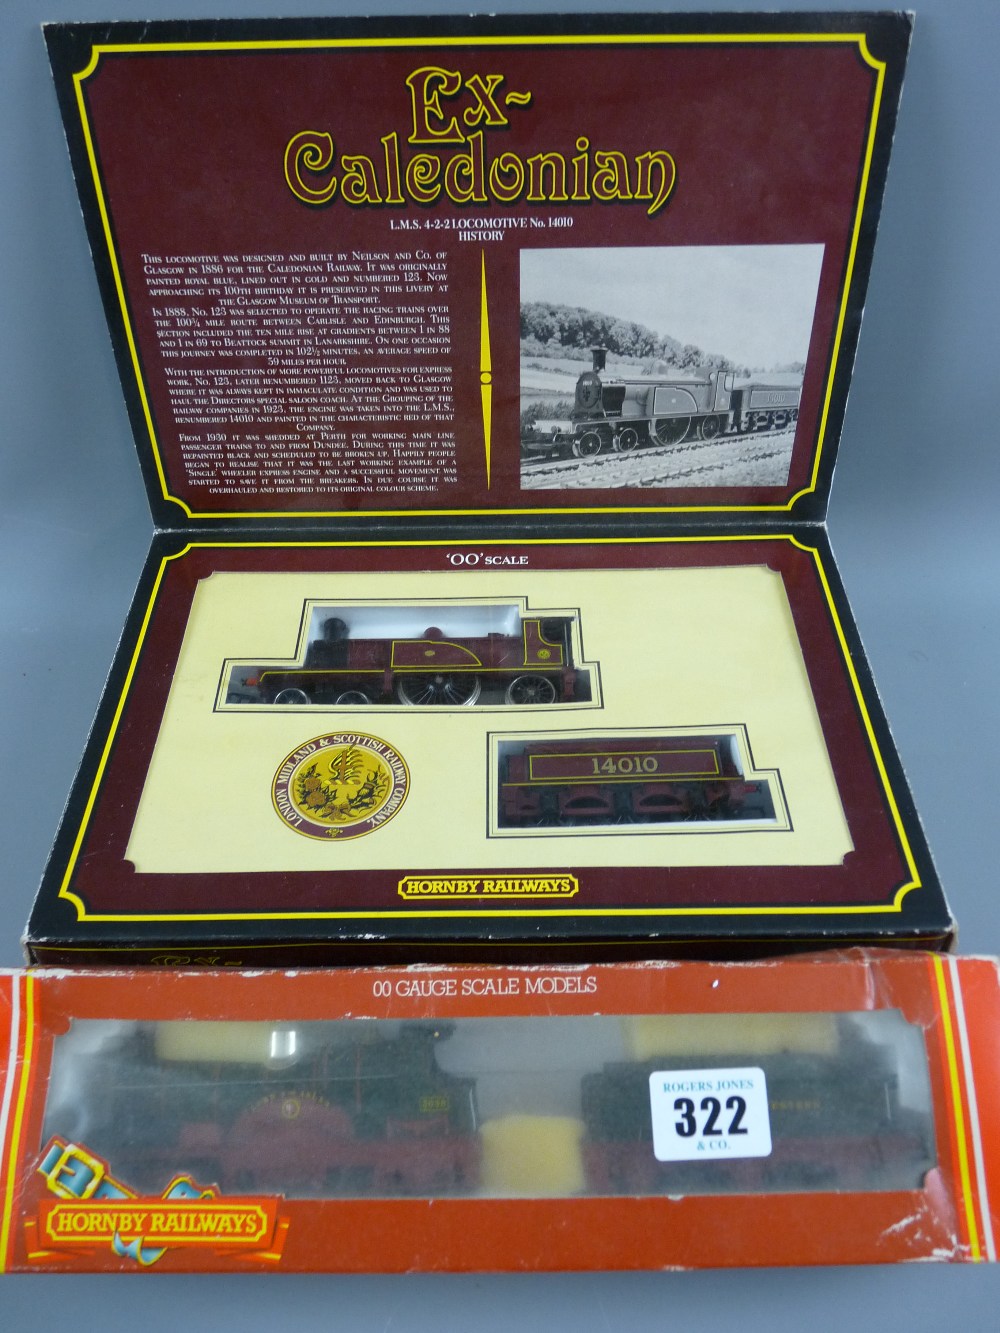 A Hornby Railways R763 X-Caledonian LMS, boxed with instructions and a Hornby Railways R795 GWR '